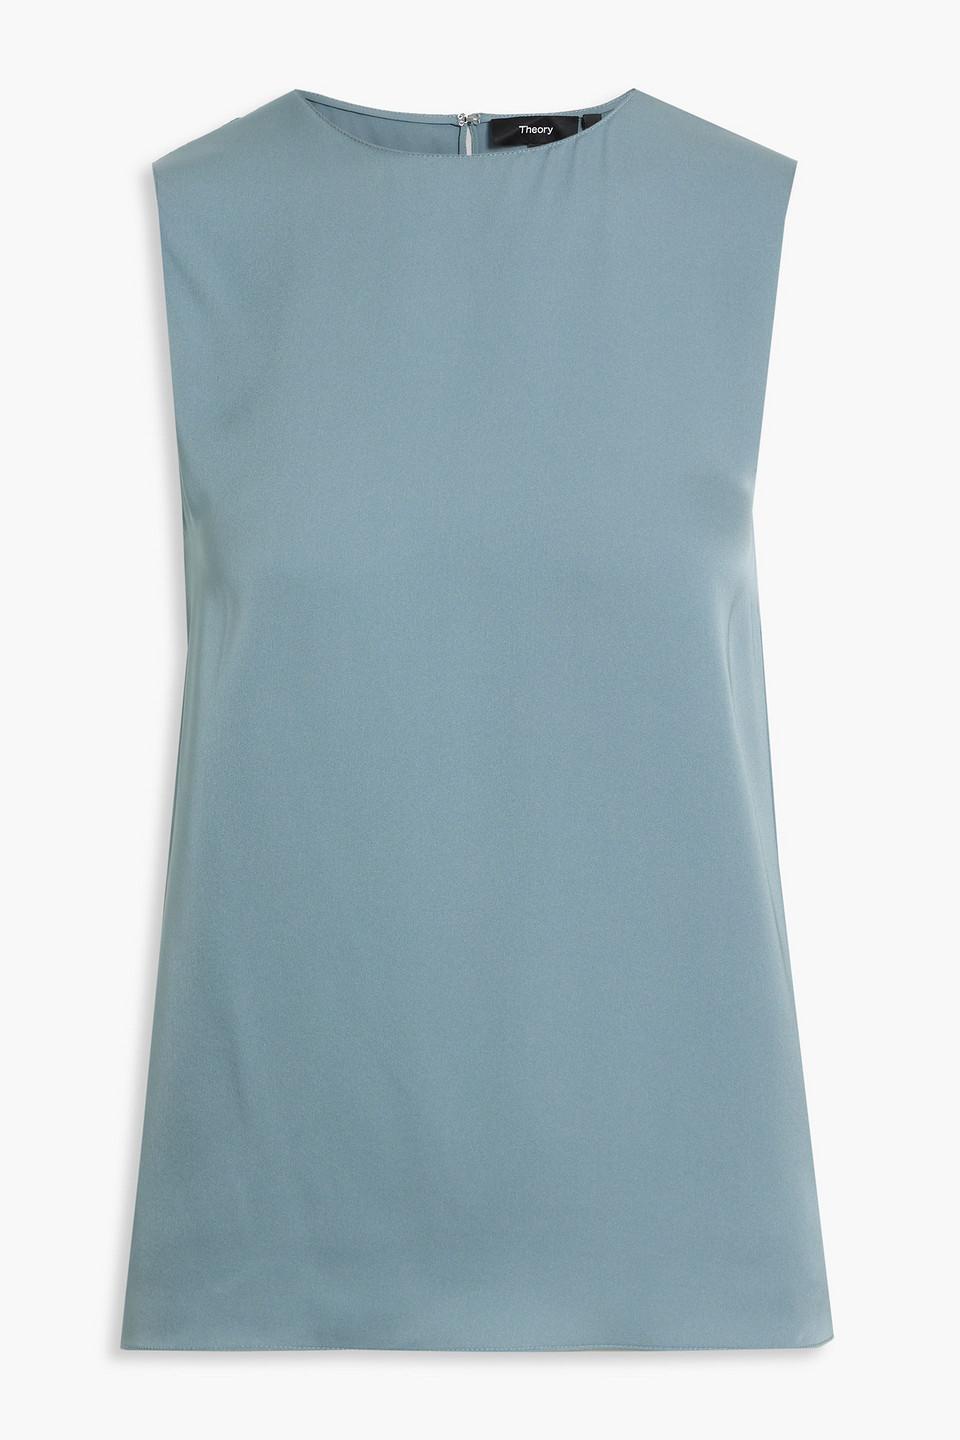 Theory Silk-crepe Top in Blue | Lyst